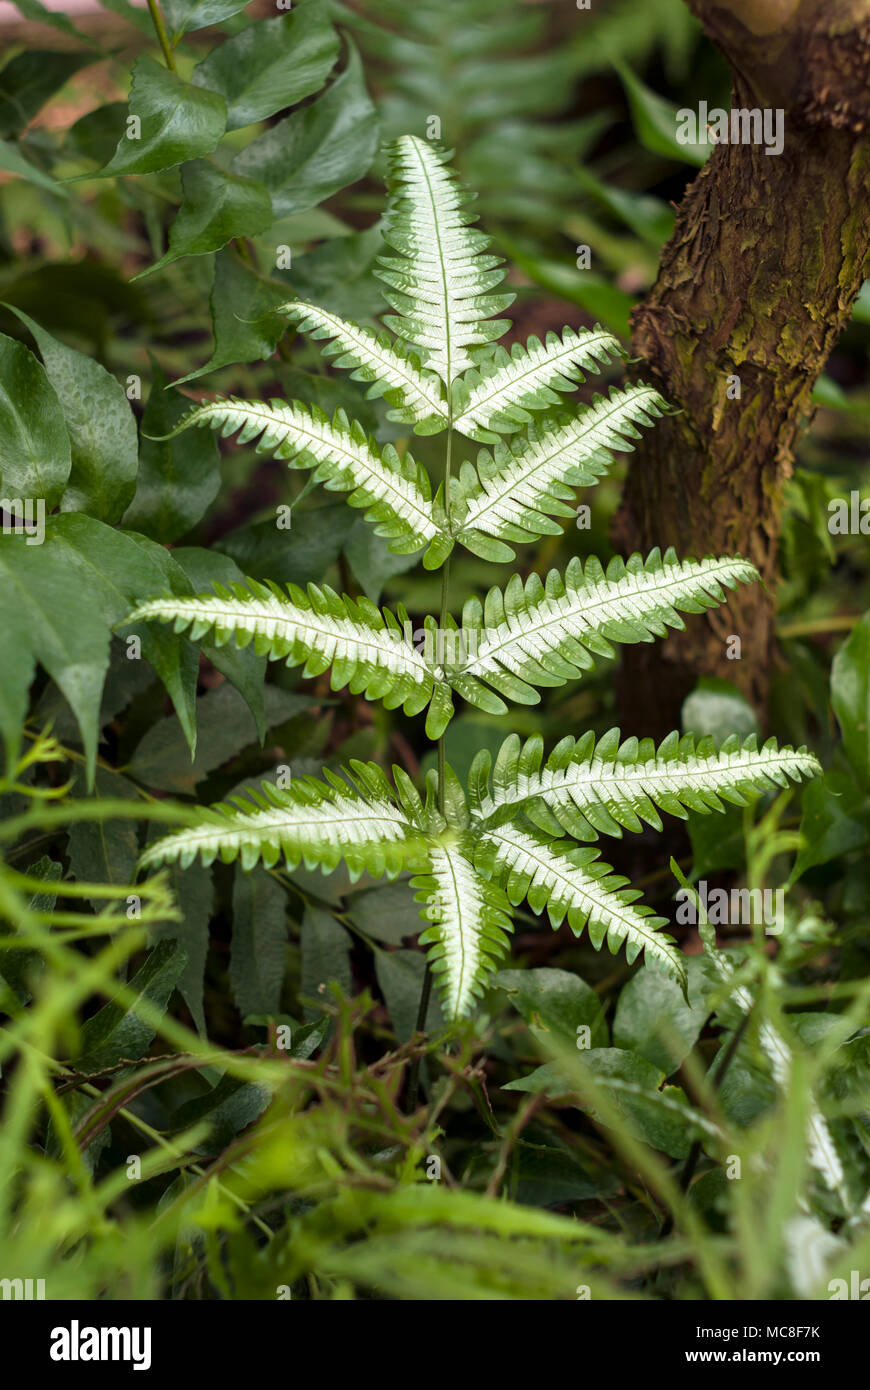 beautiful fern Pteris quadriaurita with a white pattern on the pinnate leaves in the grassy undergrowth Stock Photo